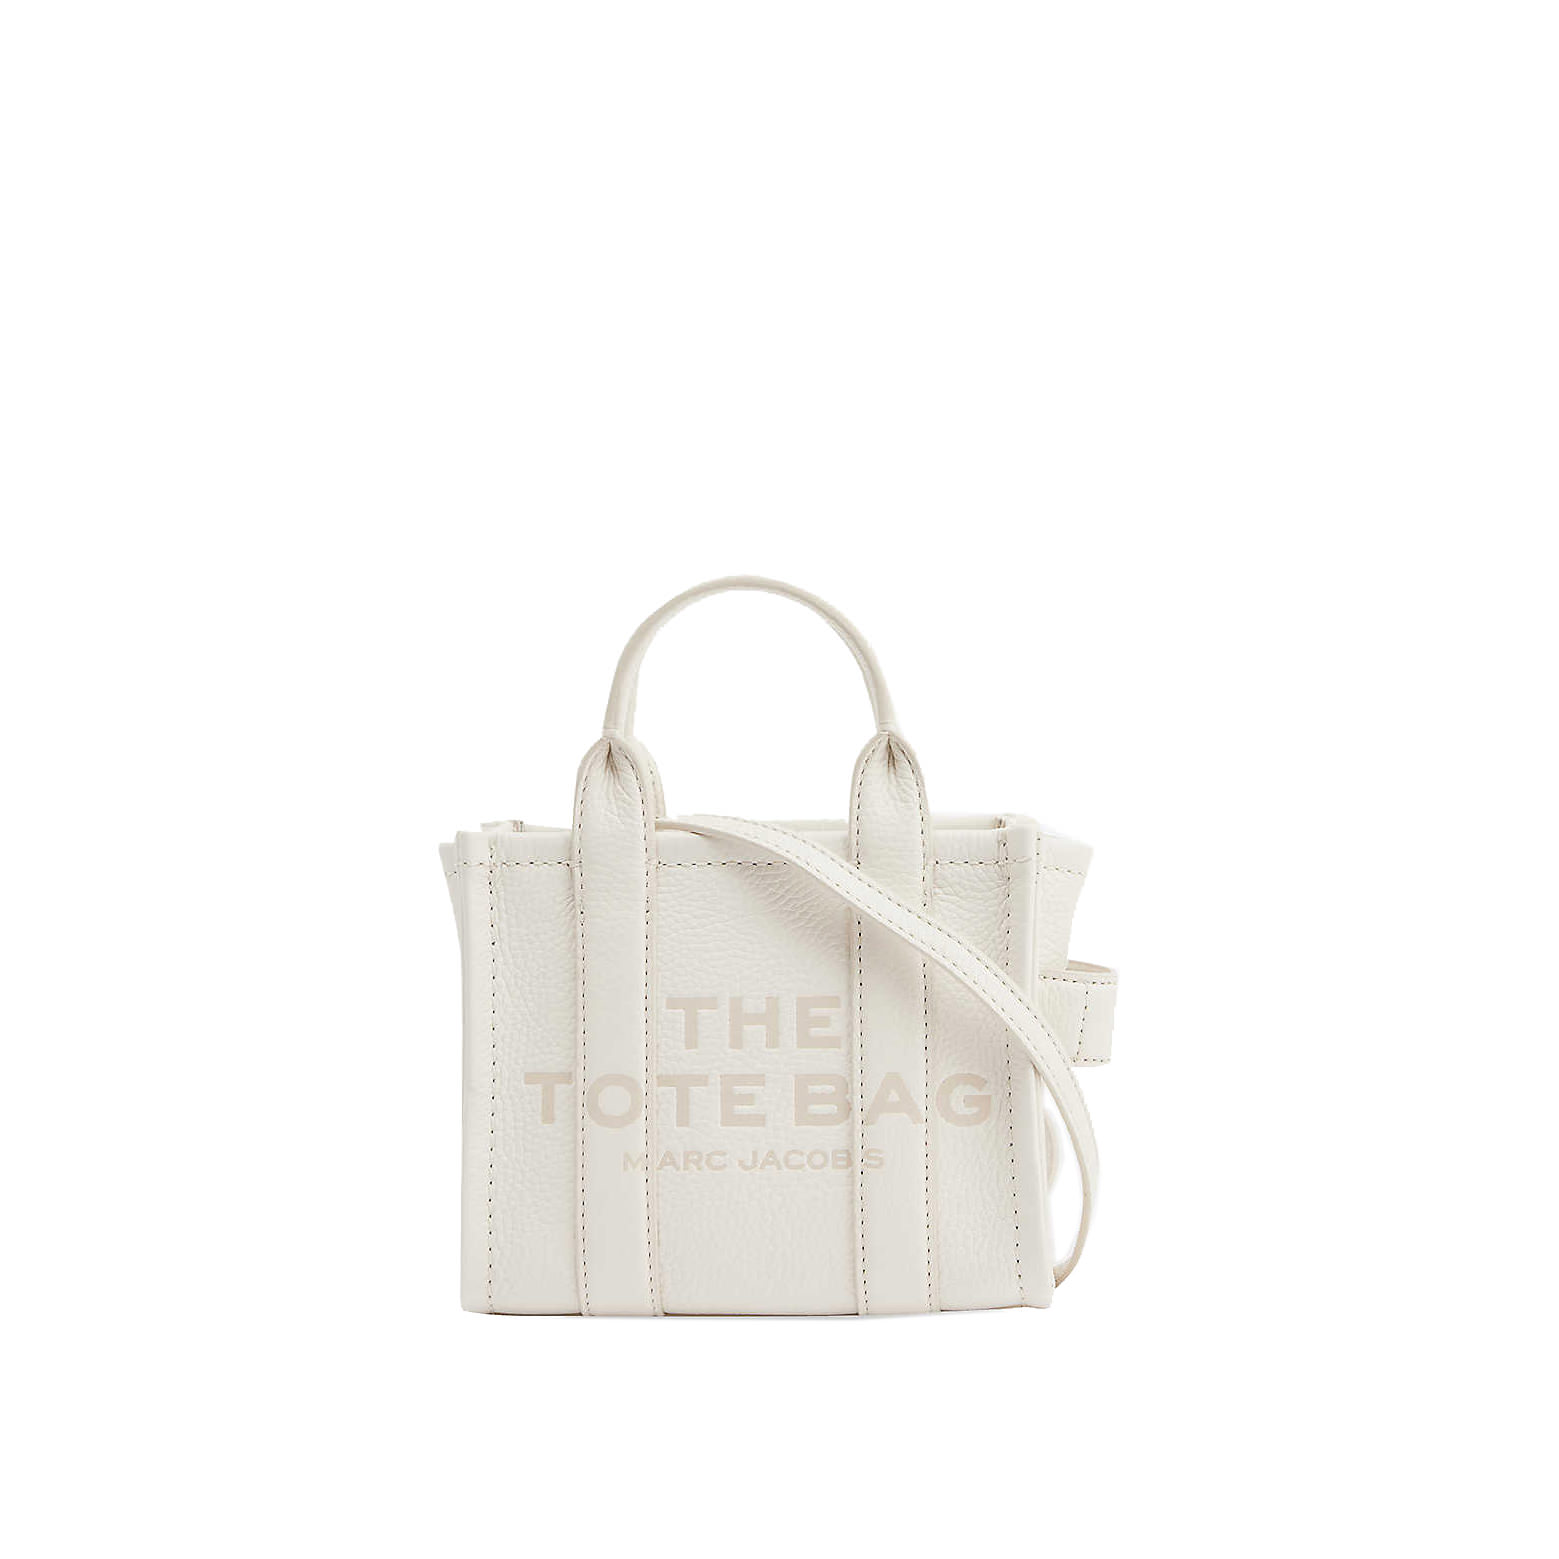 The Tote micro leather tote bag